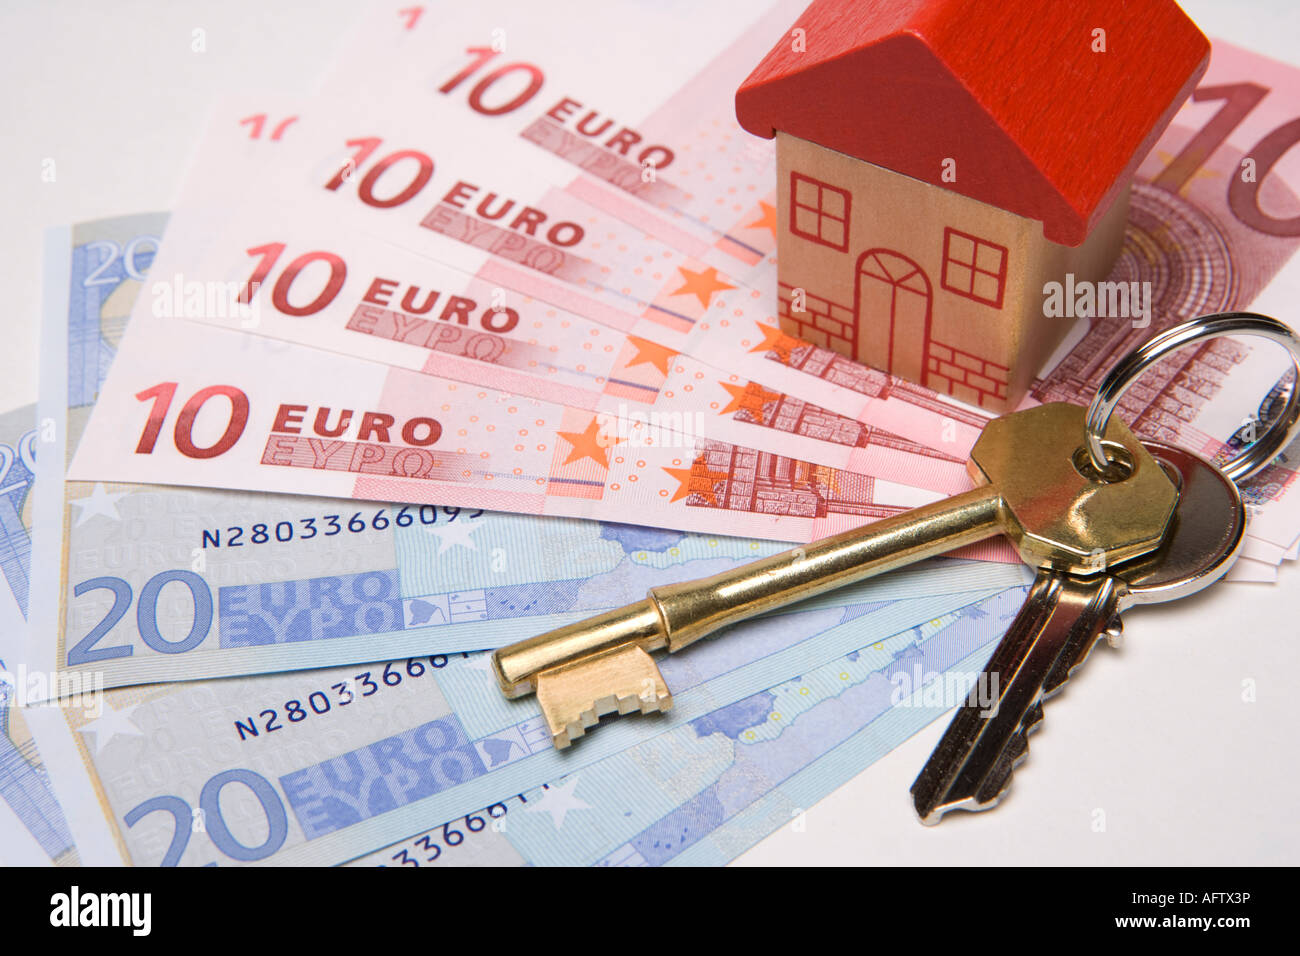 Keys to new house Buying or investing in property or house overseas or abroad with euros Stock Photo